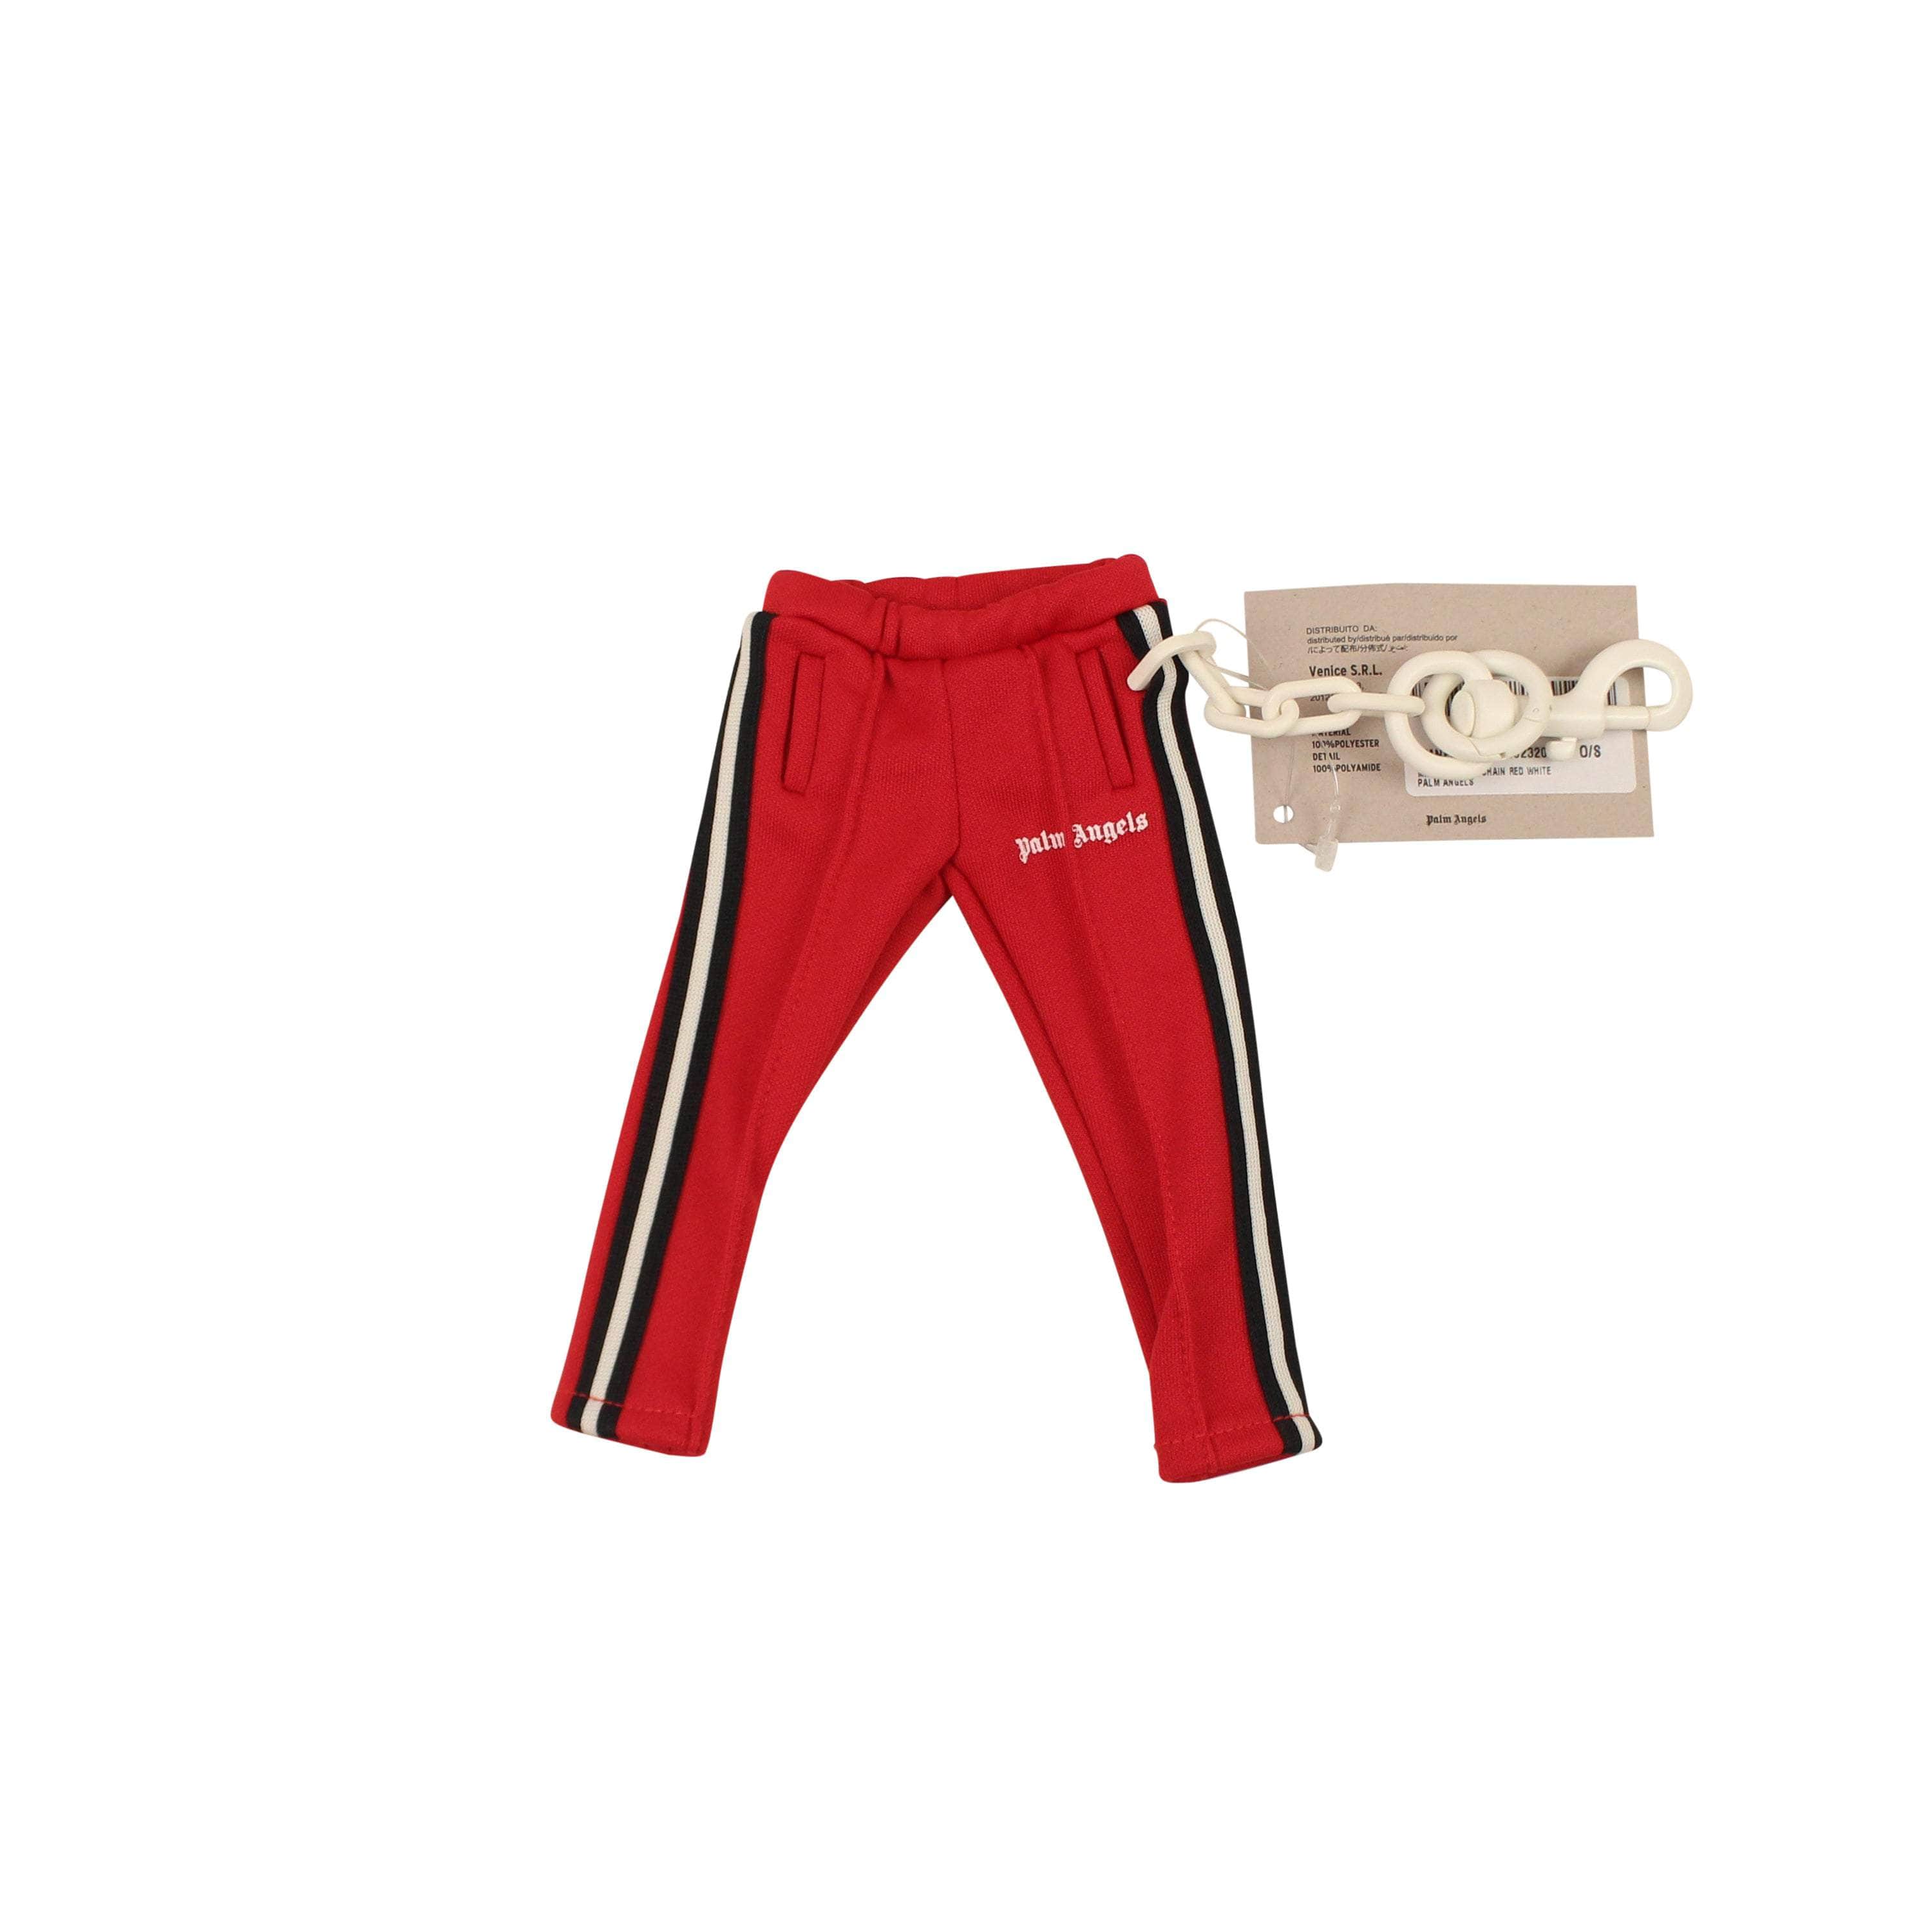 Palm Angels channelenable-all, chicmi, couponcollection, main-accessories, mens-keychains-keyrings, palm-angels, shop375, Stadium Goods, under-250 OS Red Mini Track Keychain PLM-XACC-0030/OS PLM-XACC-0030/OS